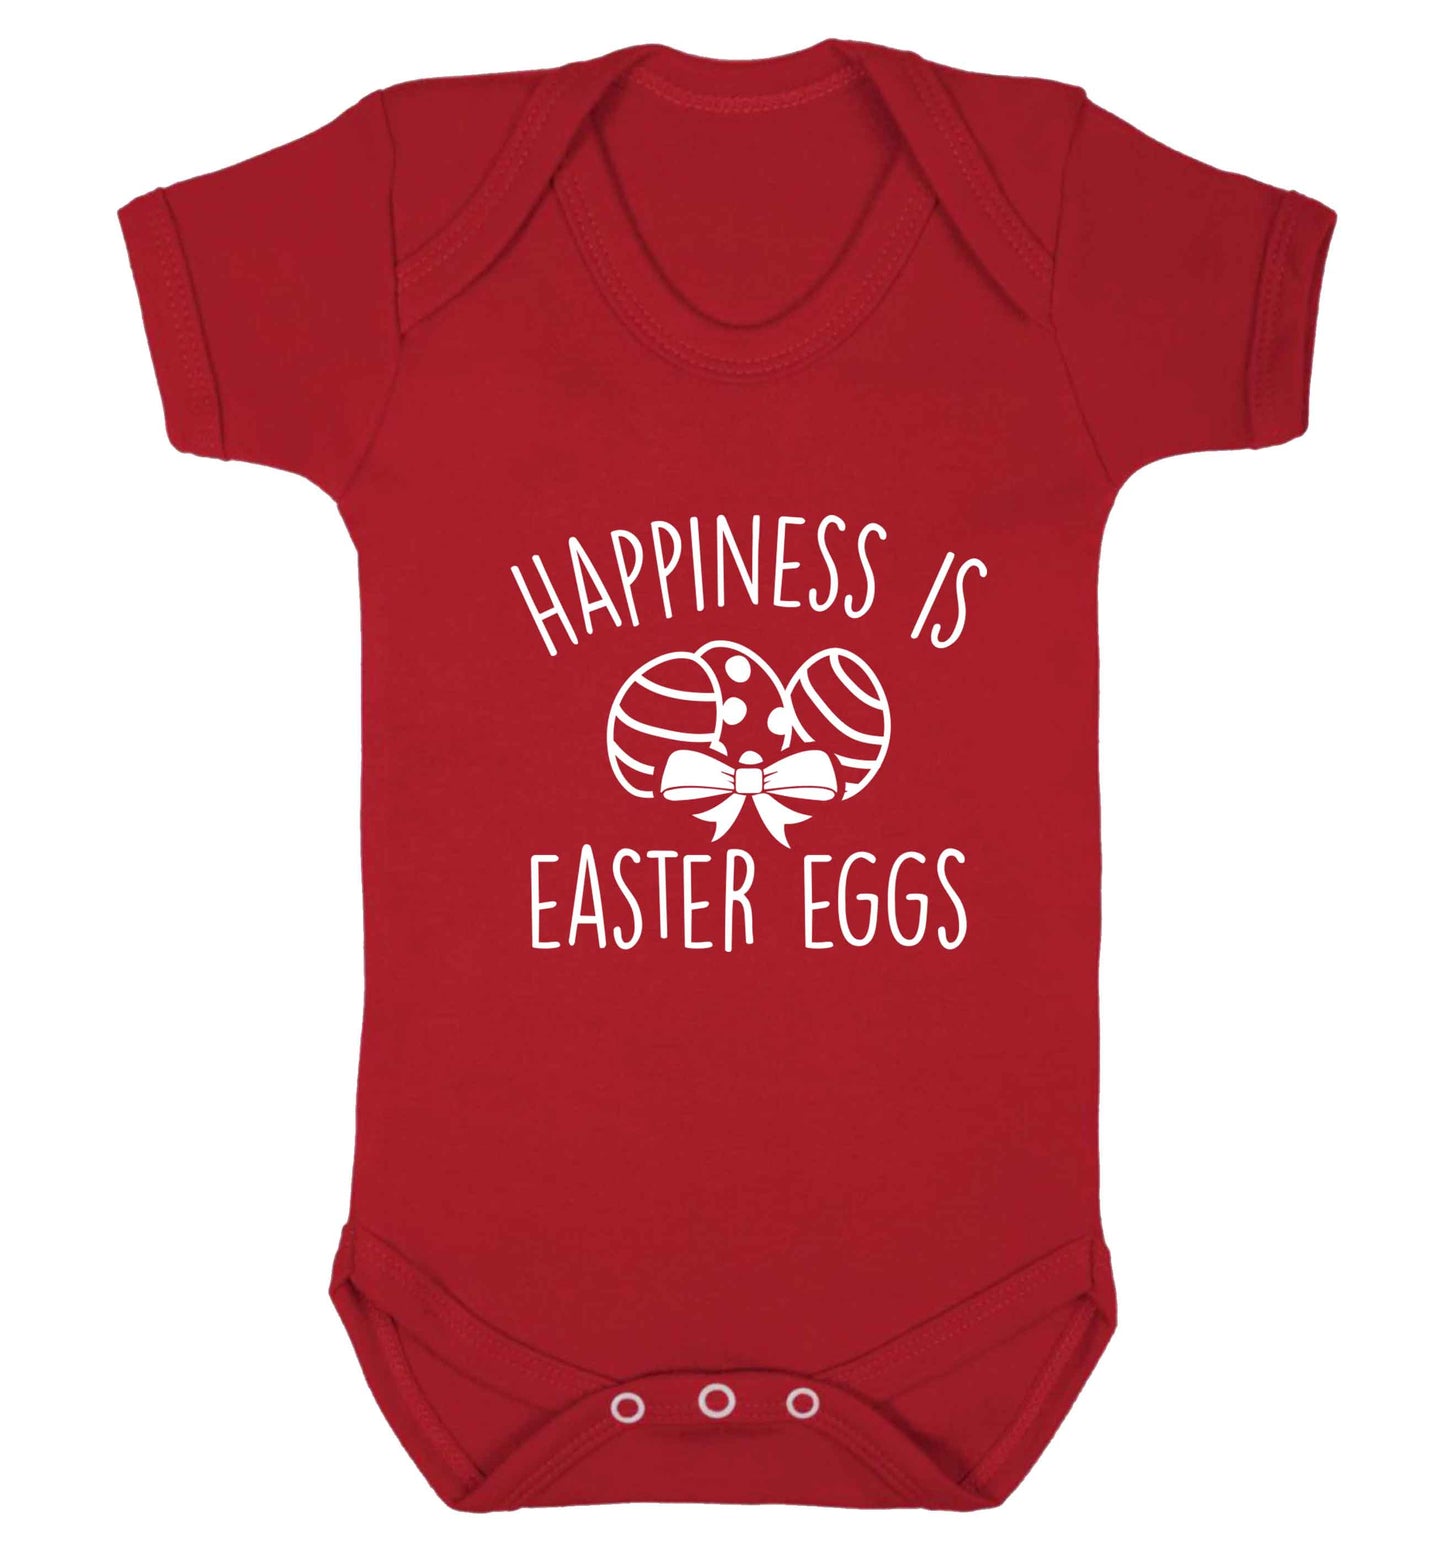 Happiness is Easter eggs baby vest red 18-24 months